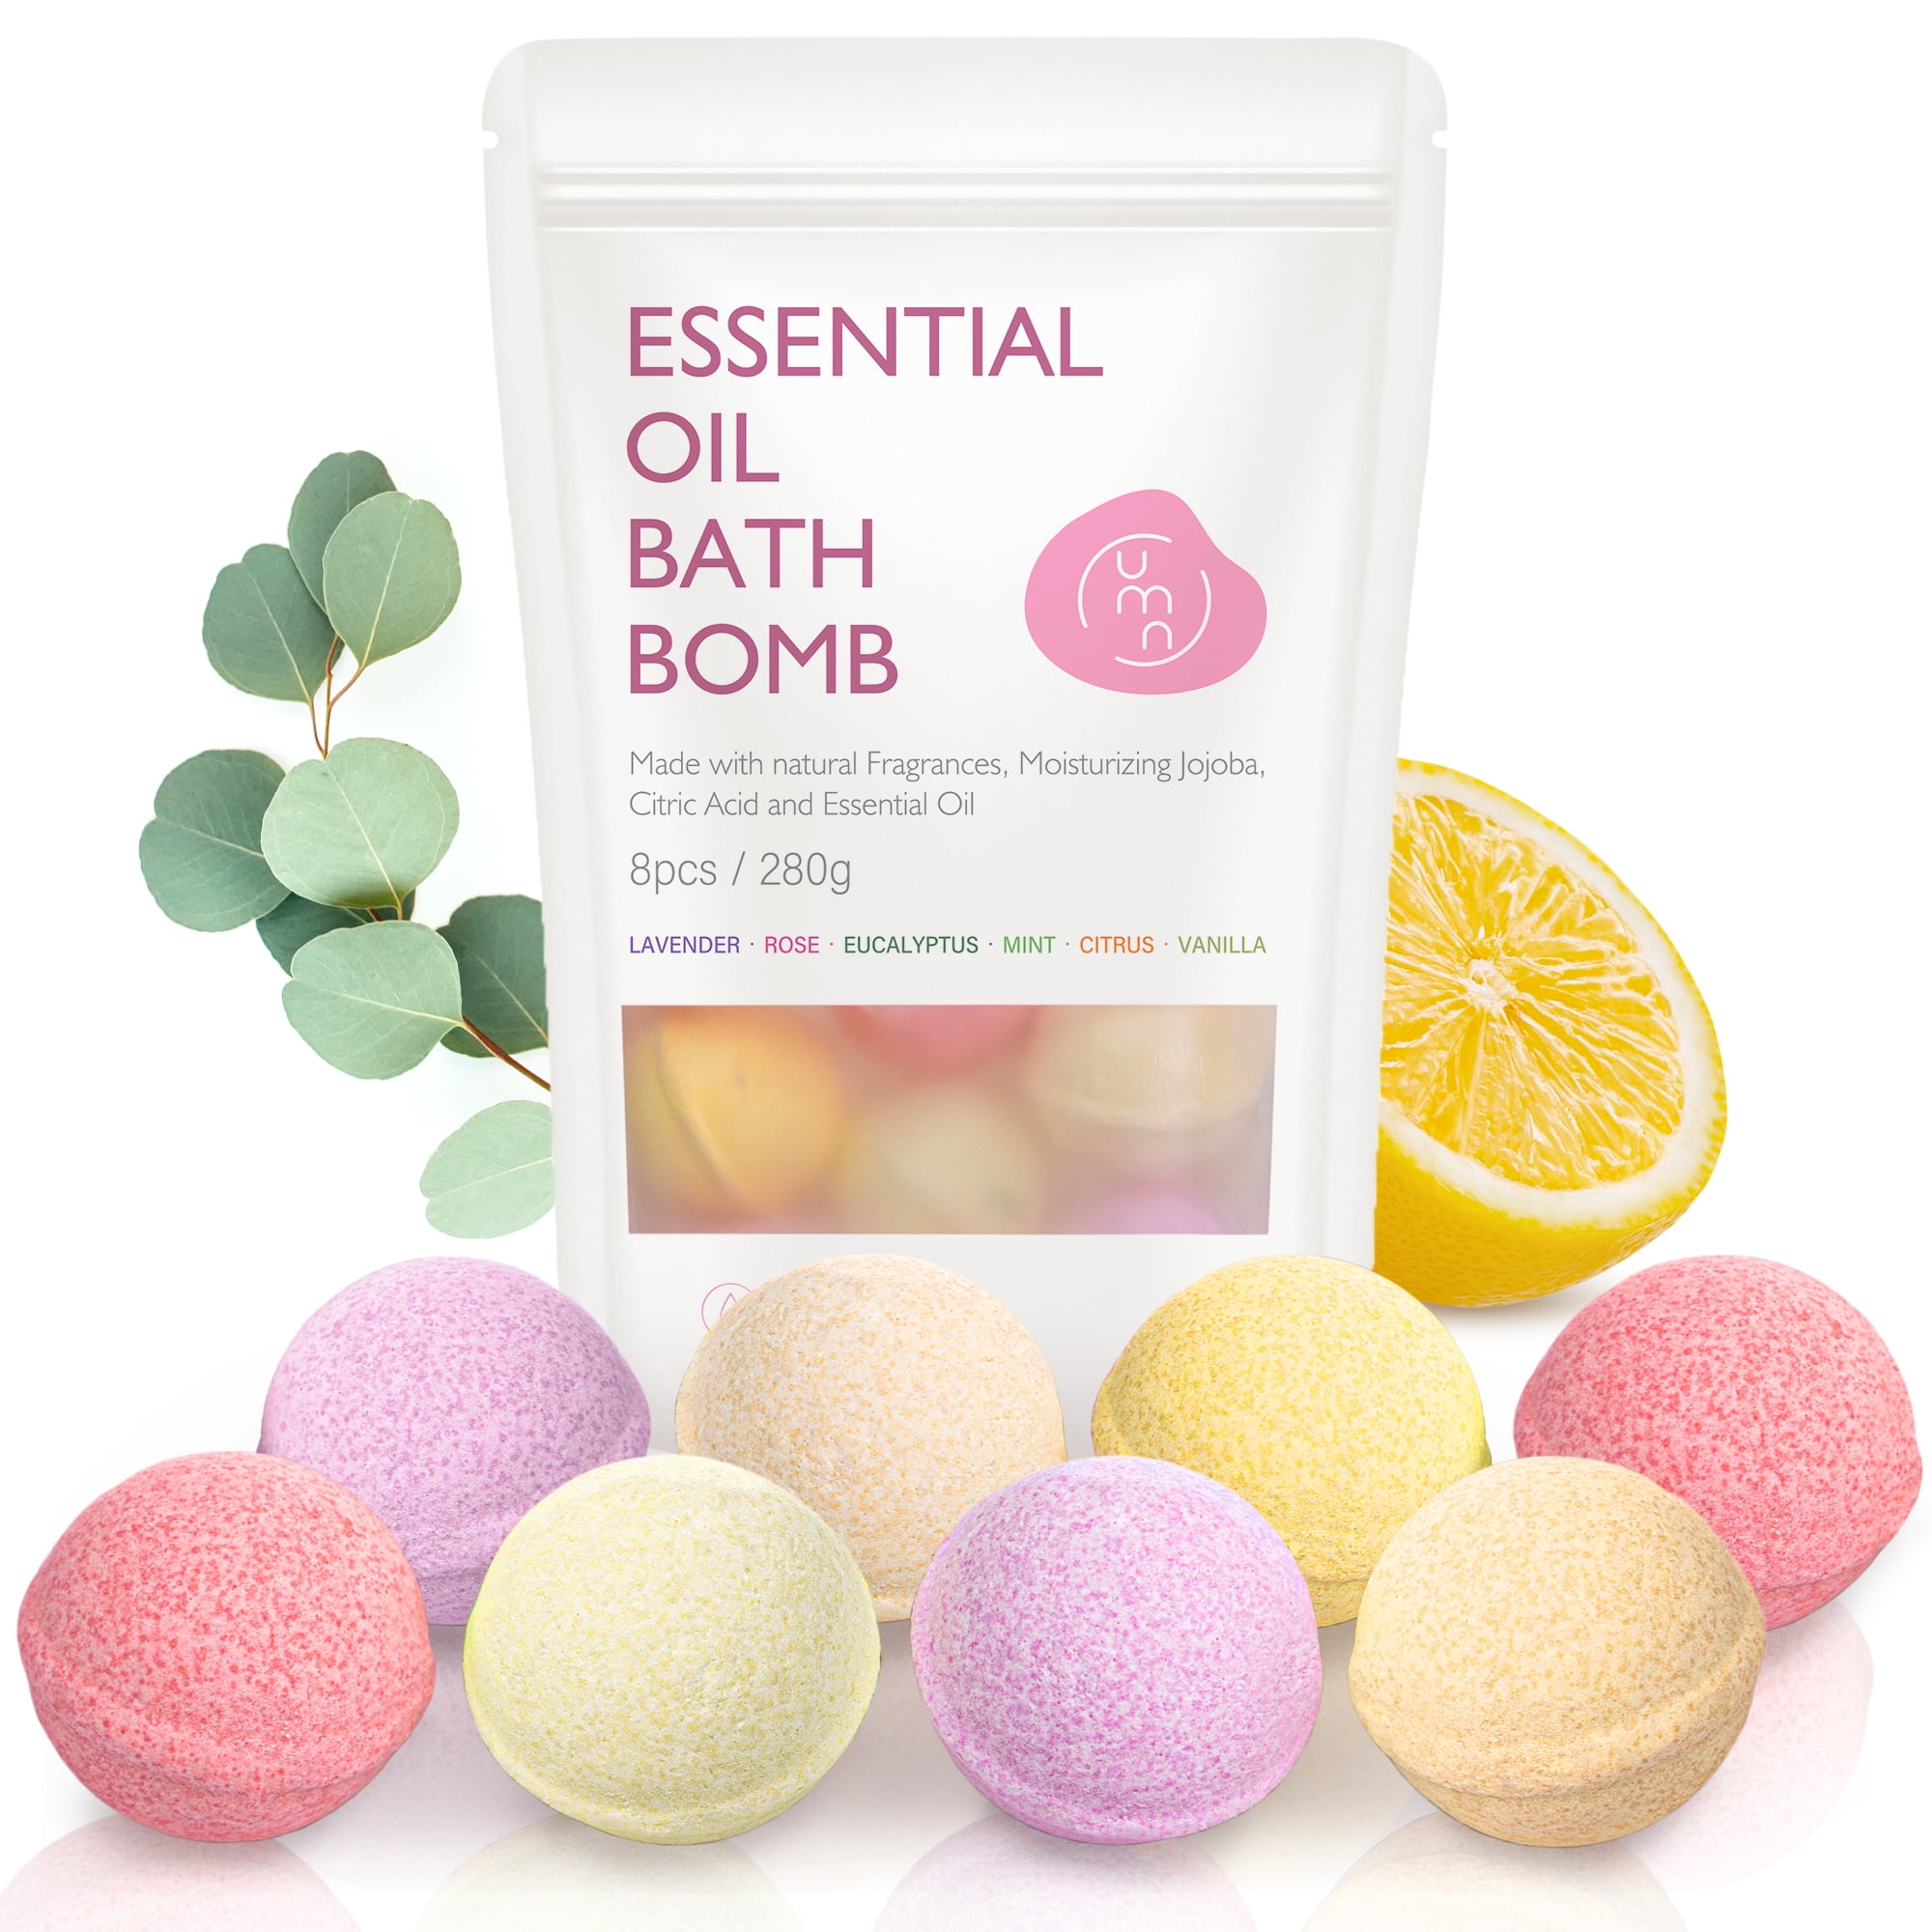 It's Just - Citric Acid, Food Grade, Non-GMO, Bath Bombs (2.5 Pounds) 